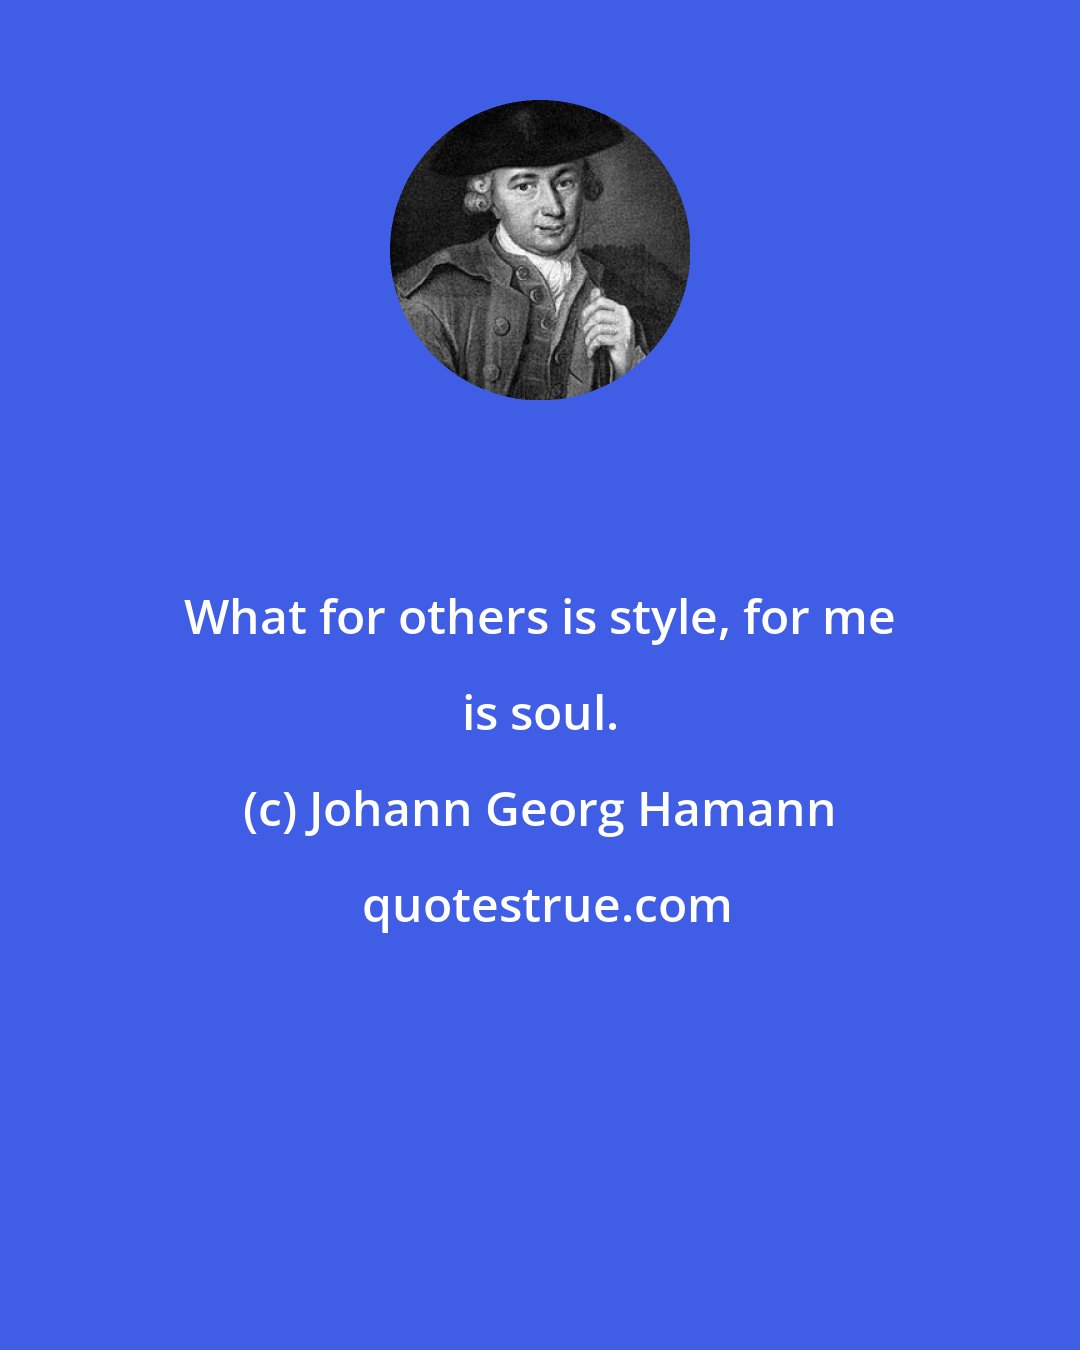 Johann Georg Hamann: What for others is style, for me is soul.